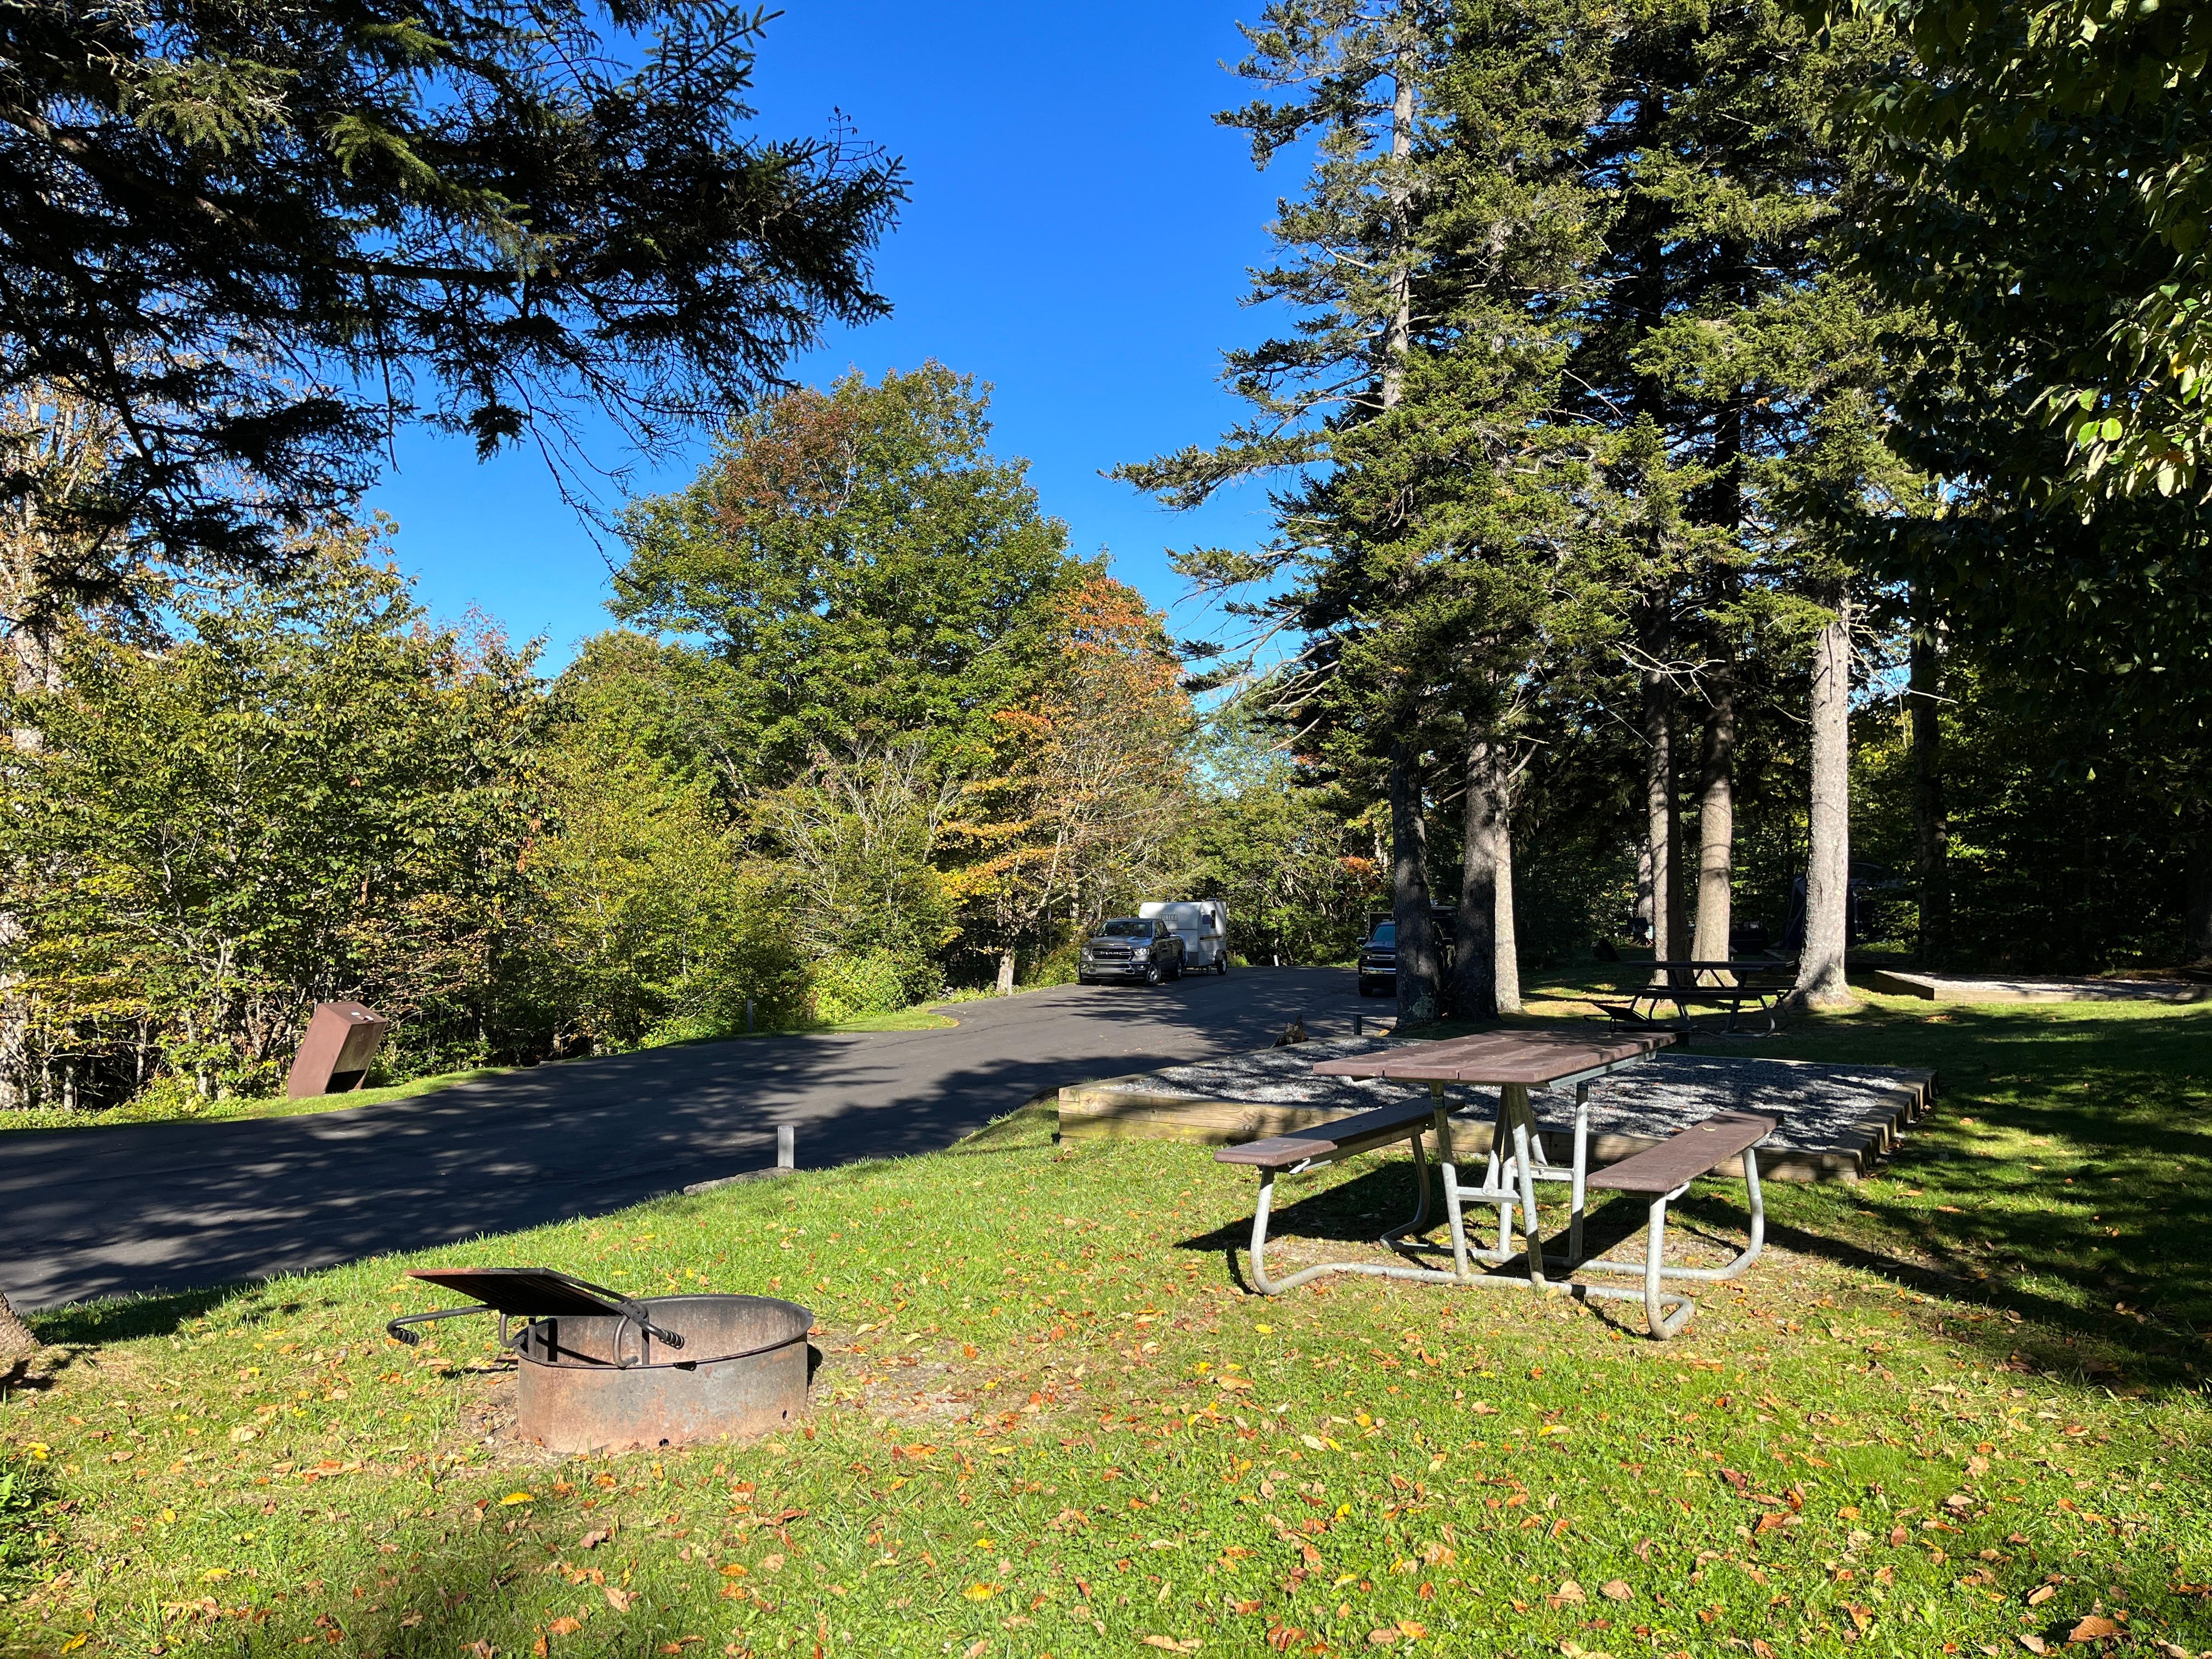 A fire ring, picnic table, and gravel tent pad in the foreground surrounded by trees and grass.